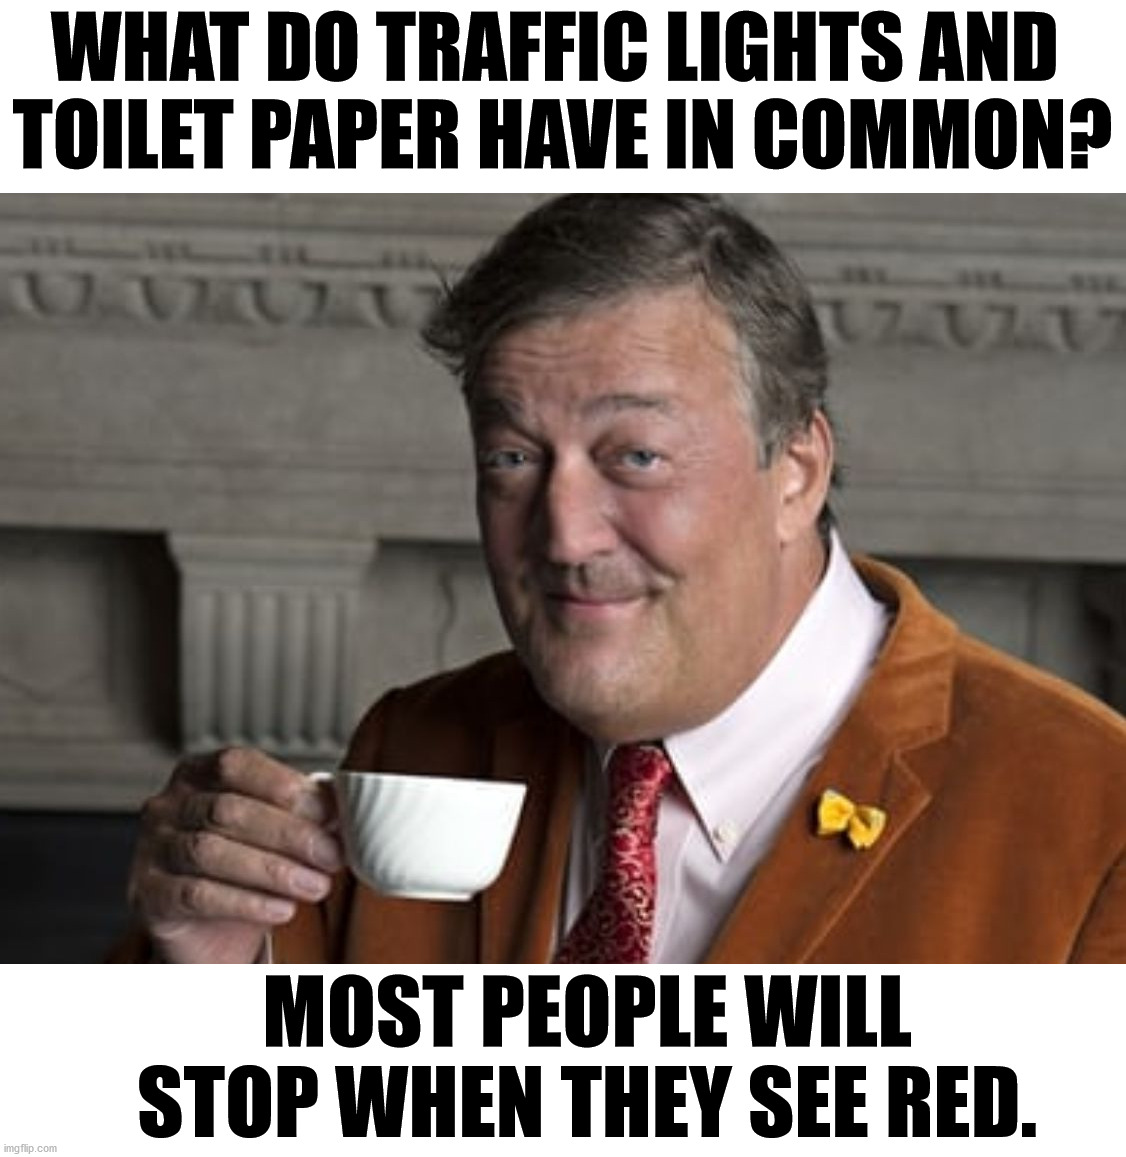 This meme makes me see red. | WHAT DO TRAFFIC LIGHTS AND 
TOILET PAPER HAVE IN COMMON? MOST PEOPLE WILL STOP WHEN THEY SEE RED. | image tagged in did you know,red,toilet paper,traffic light | made w/ Imgflip meme maker